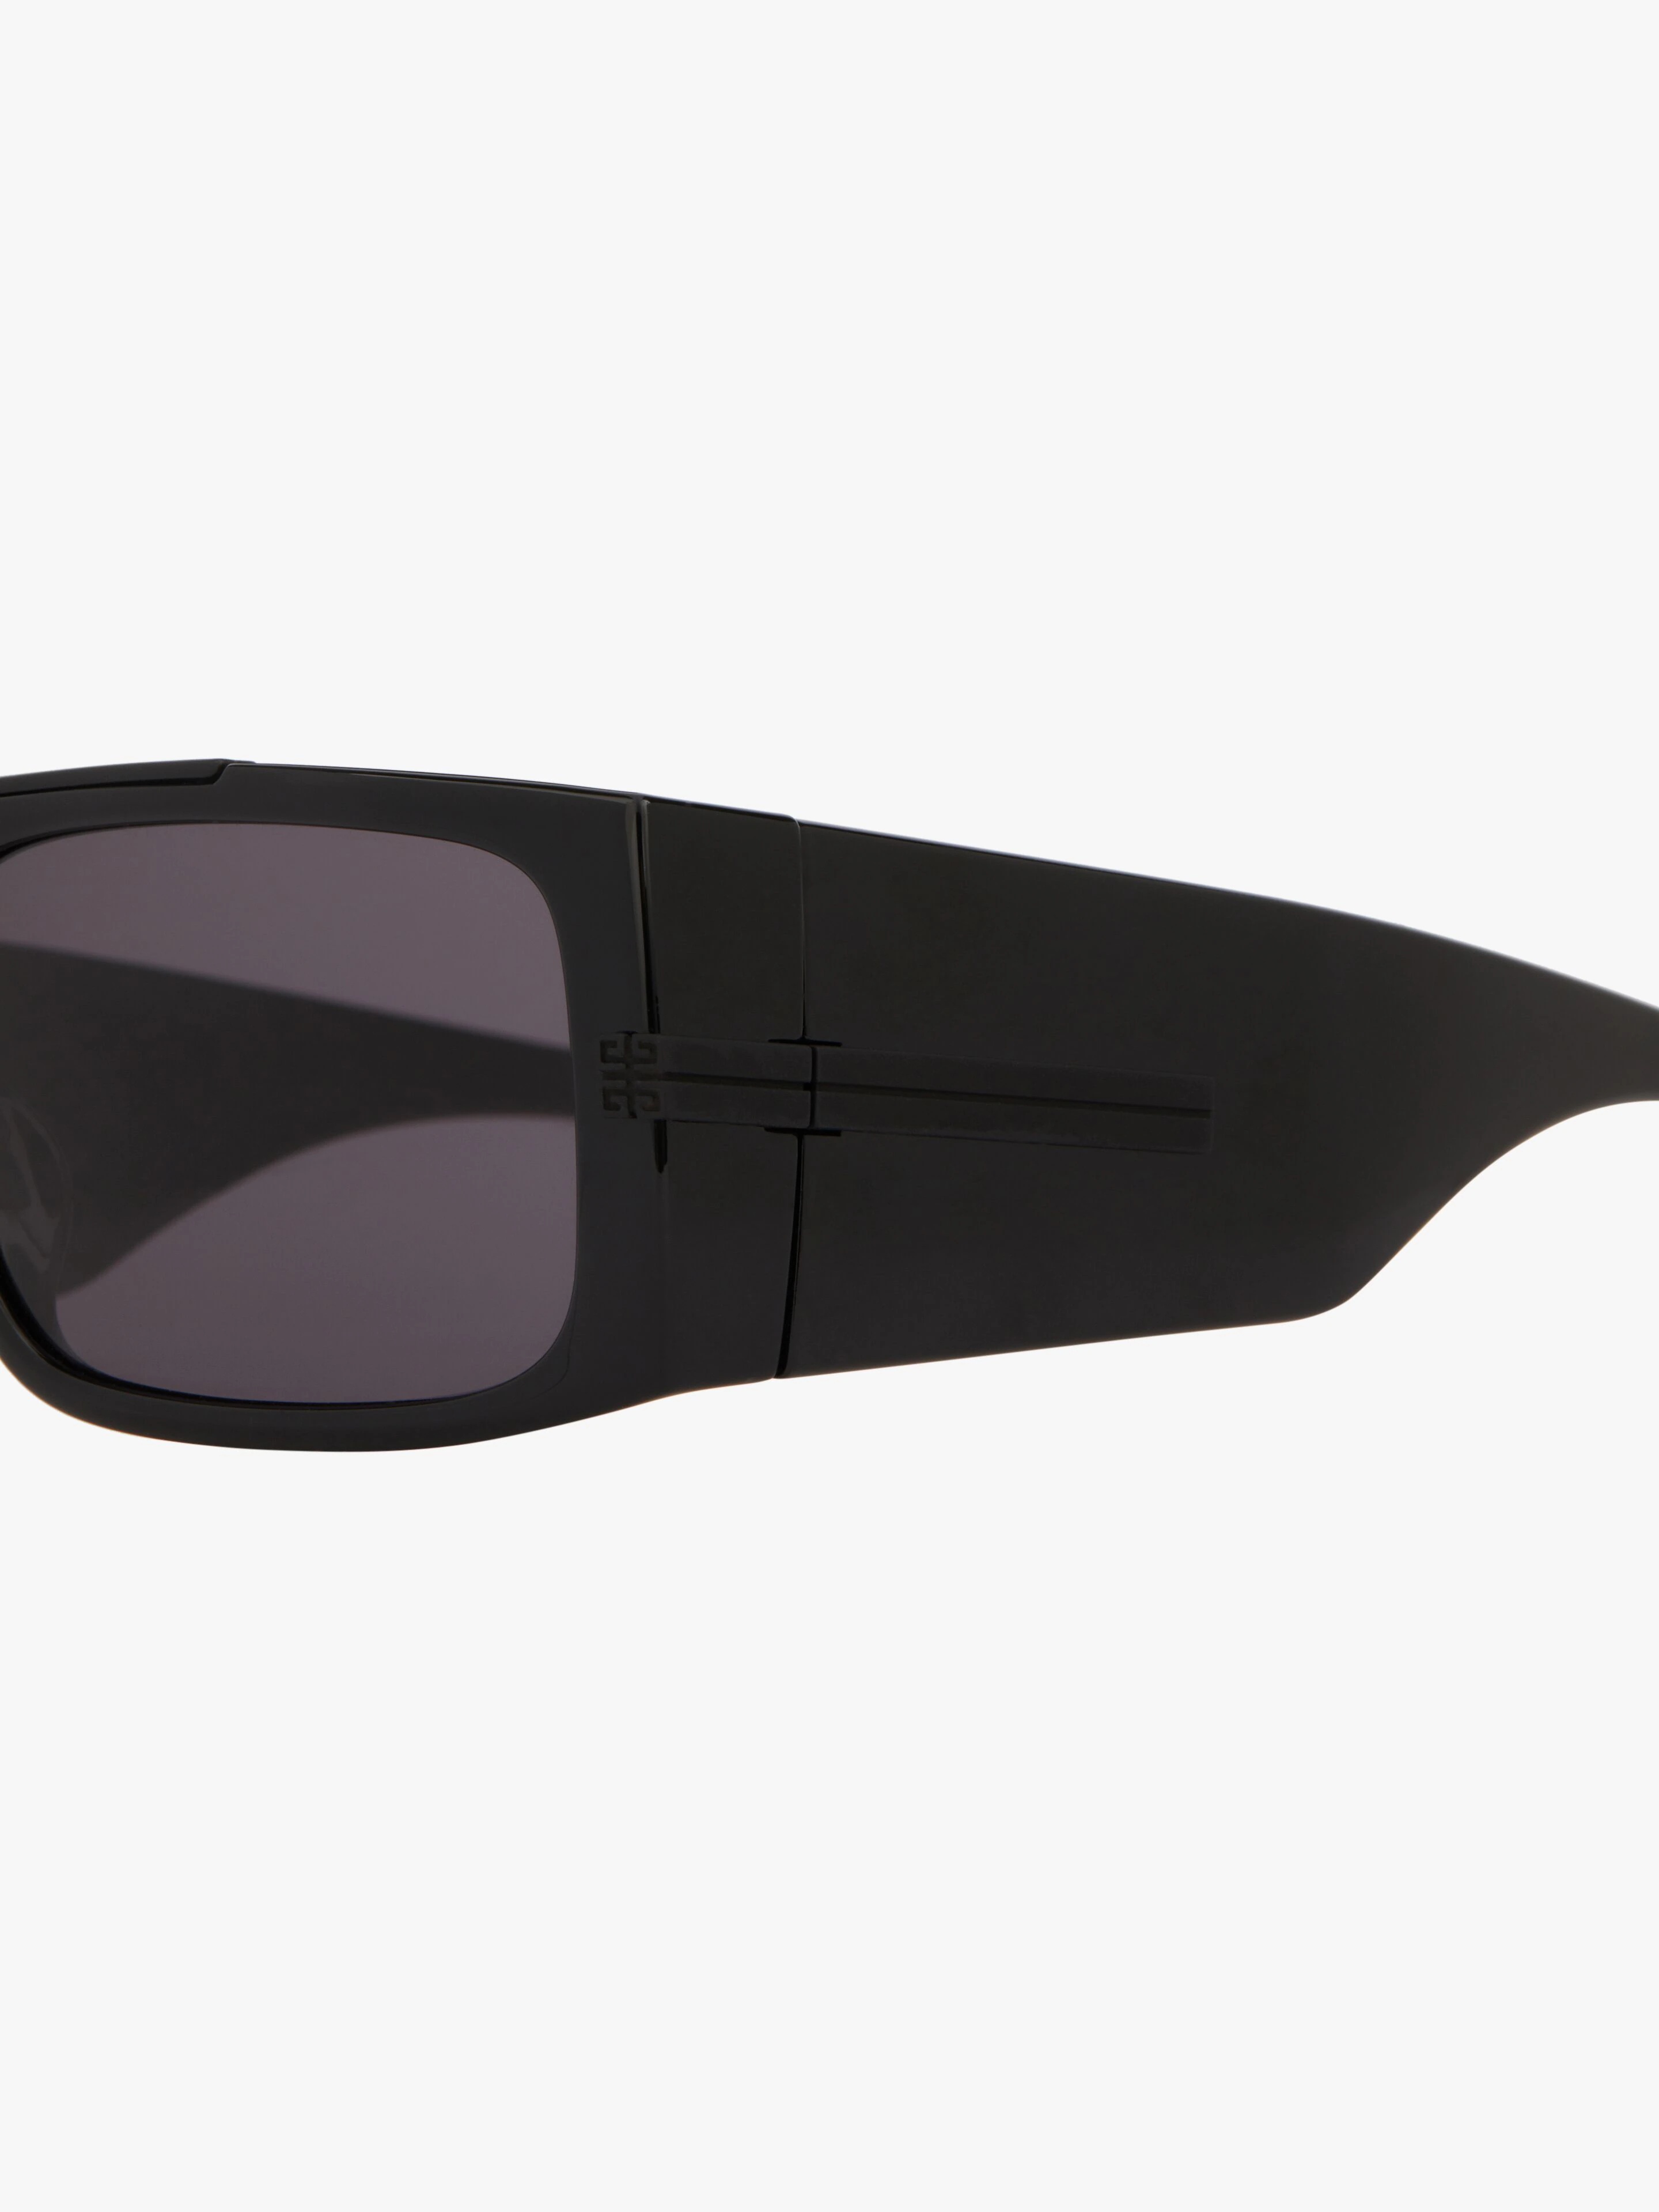 GV BAR SUNGLASSES IN INJECTED - 6